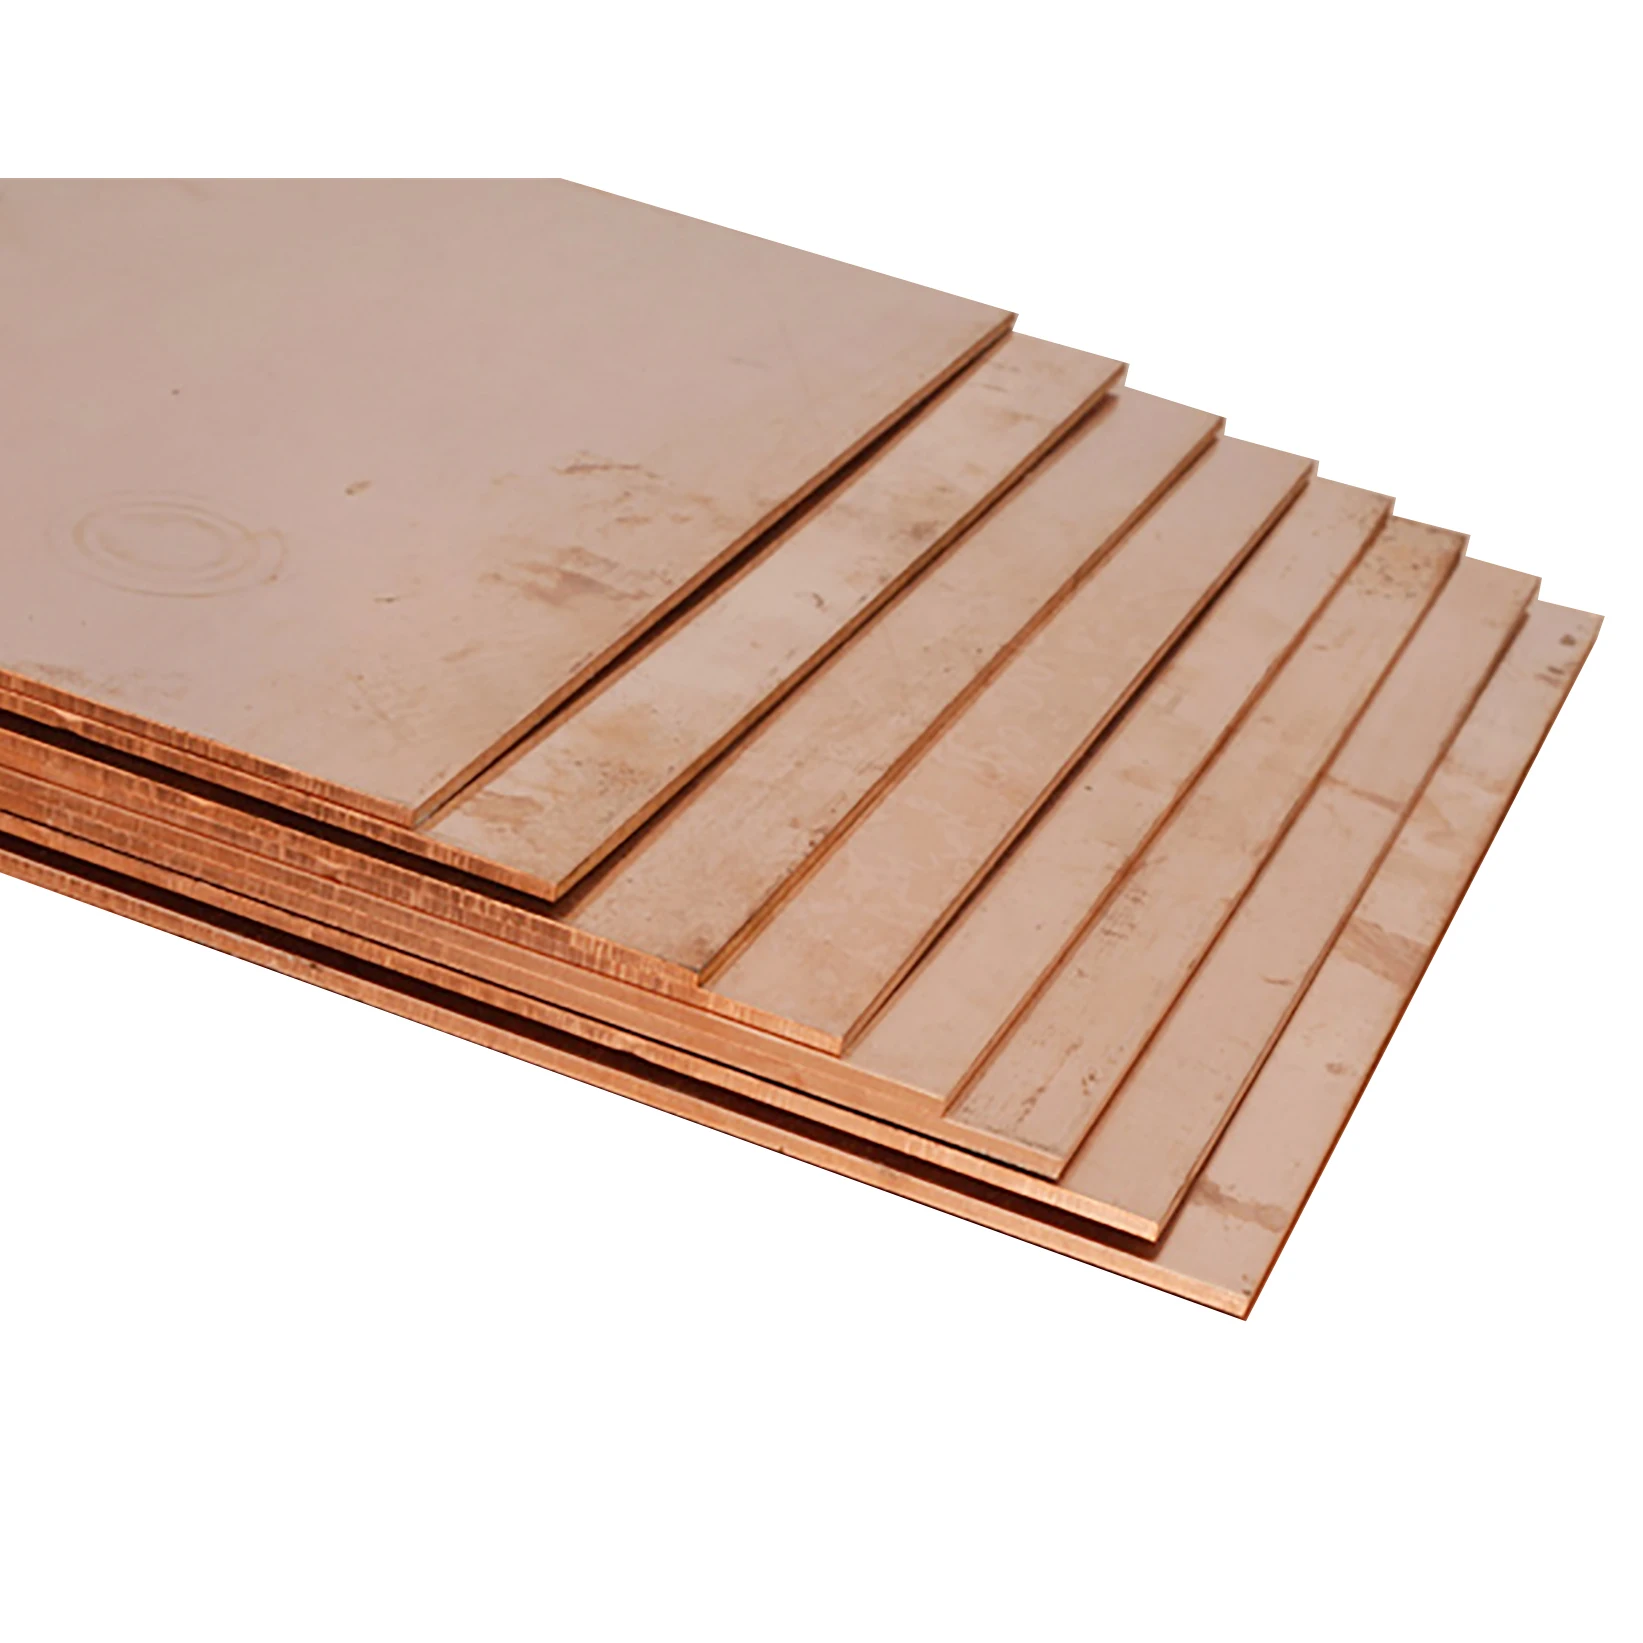 Cube2 copper T2 good quality low price popular product pure copper sheet or brass copper plate gold decoration high quality